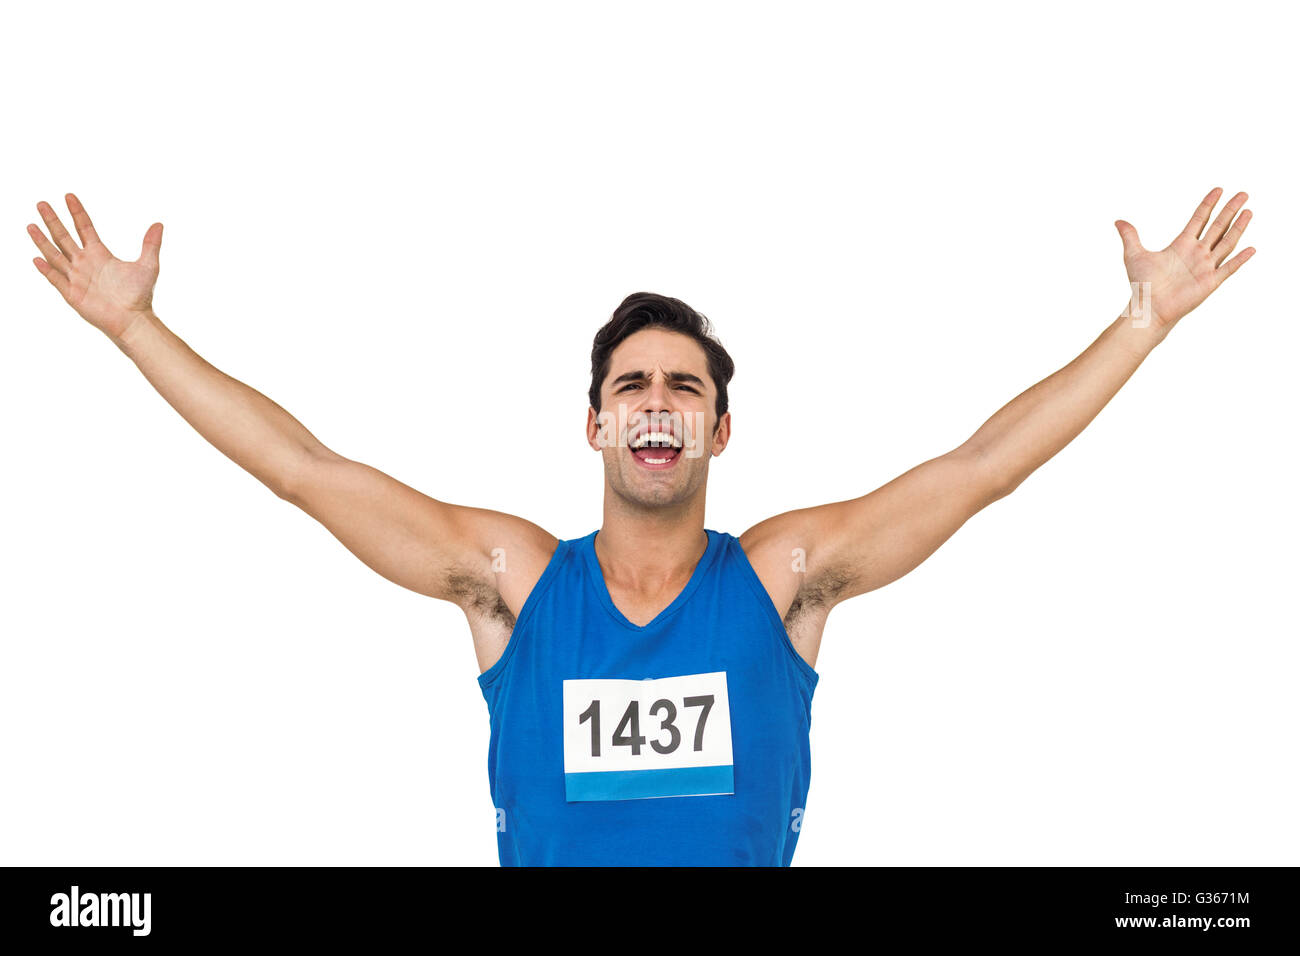 Male athlete posing after victory Stock Photo